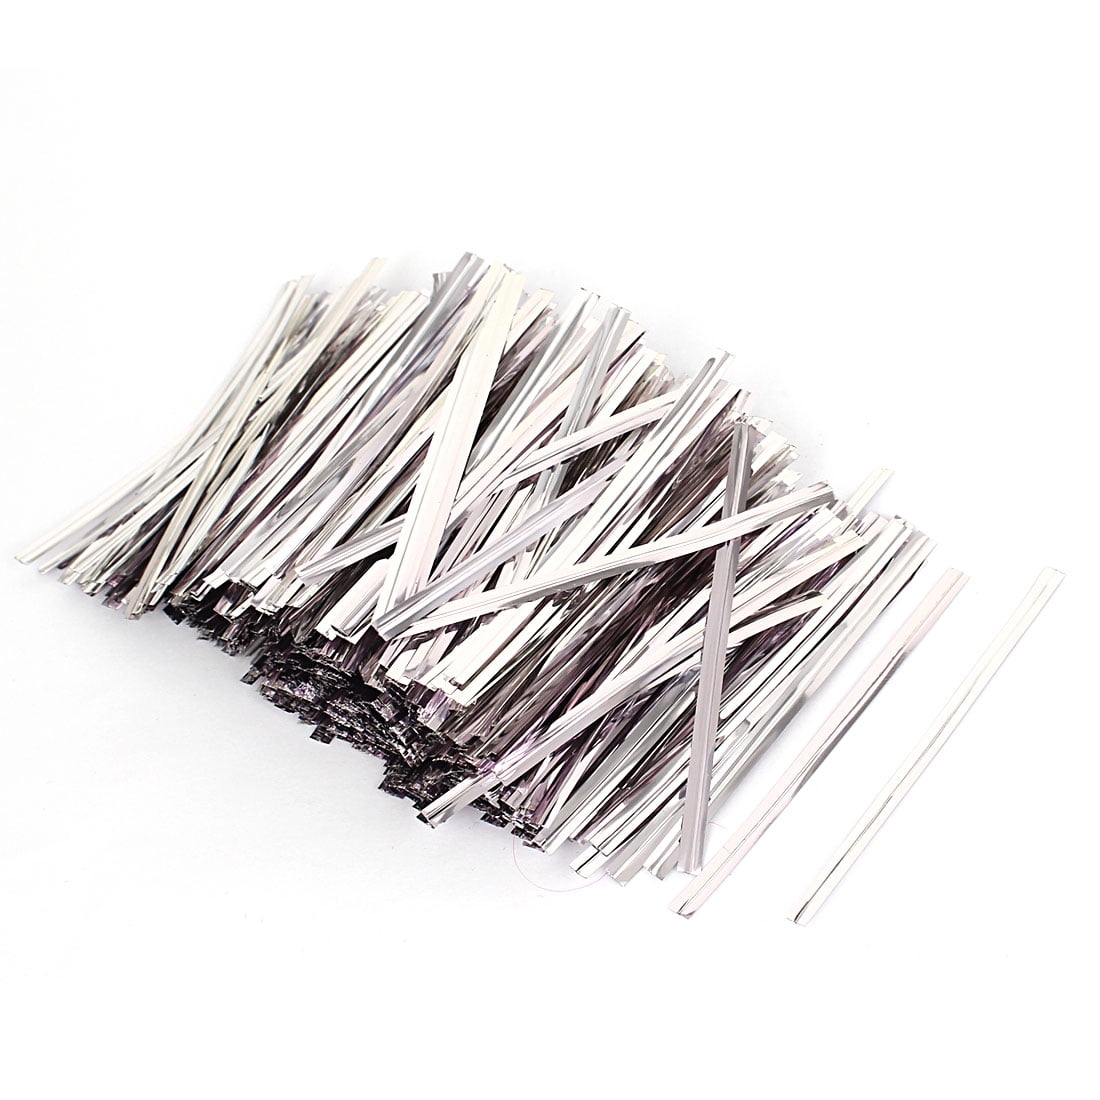 1600 Pcs 8cm Length Candy Bread Bags Packaging Twist Cable Tie ...